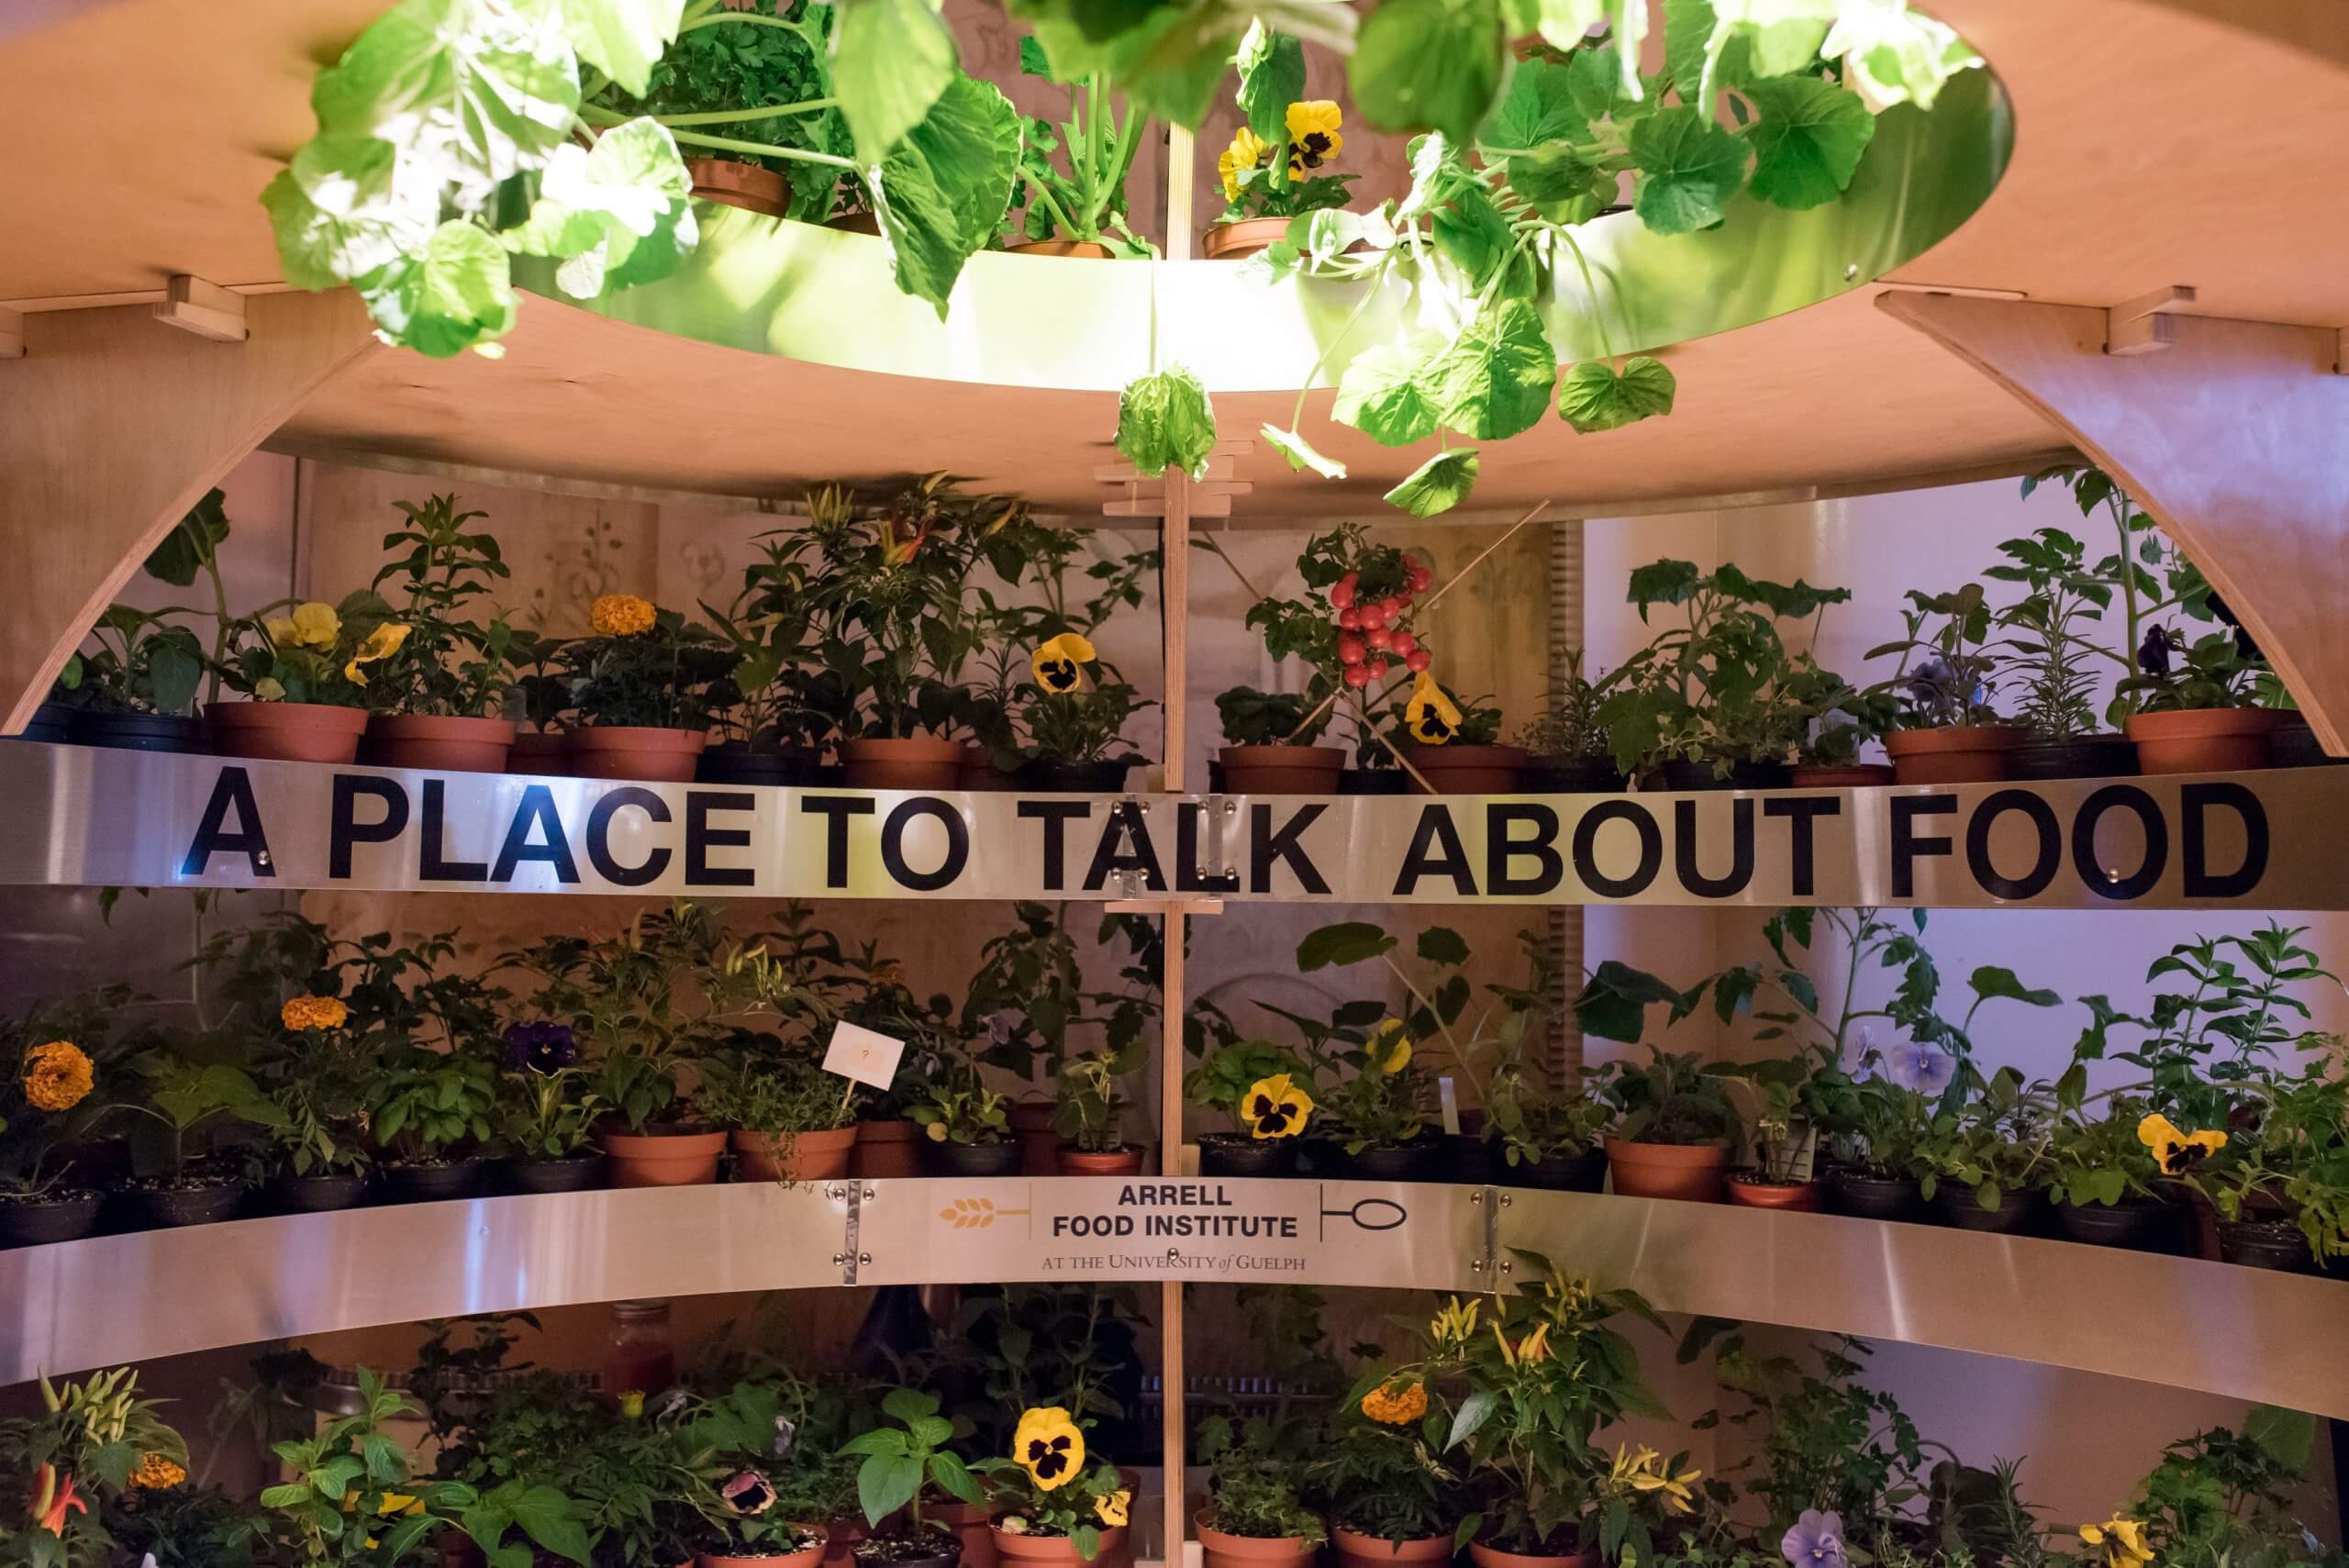 A curving plant display with the words "A place to talk about plants" written across it.